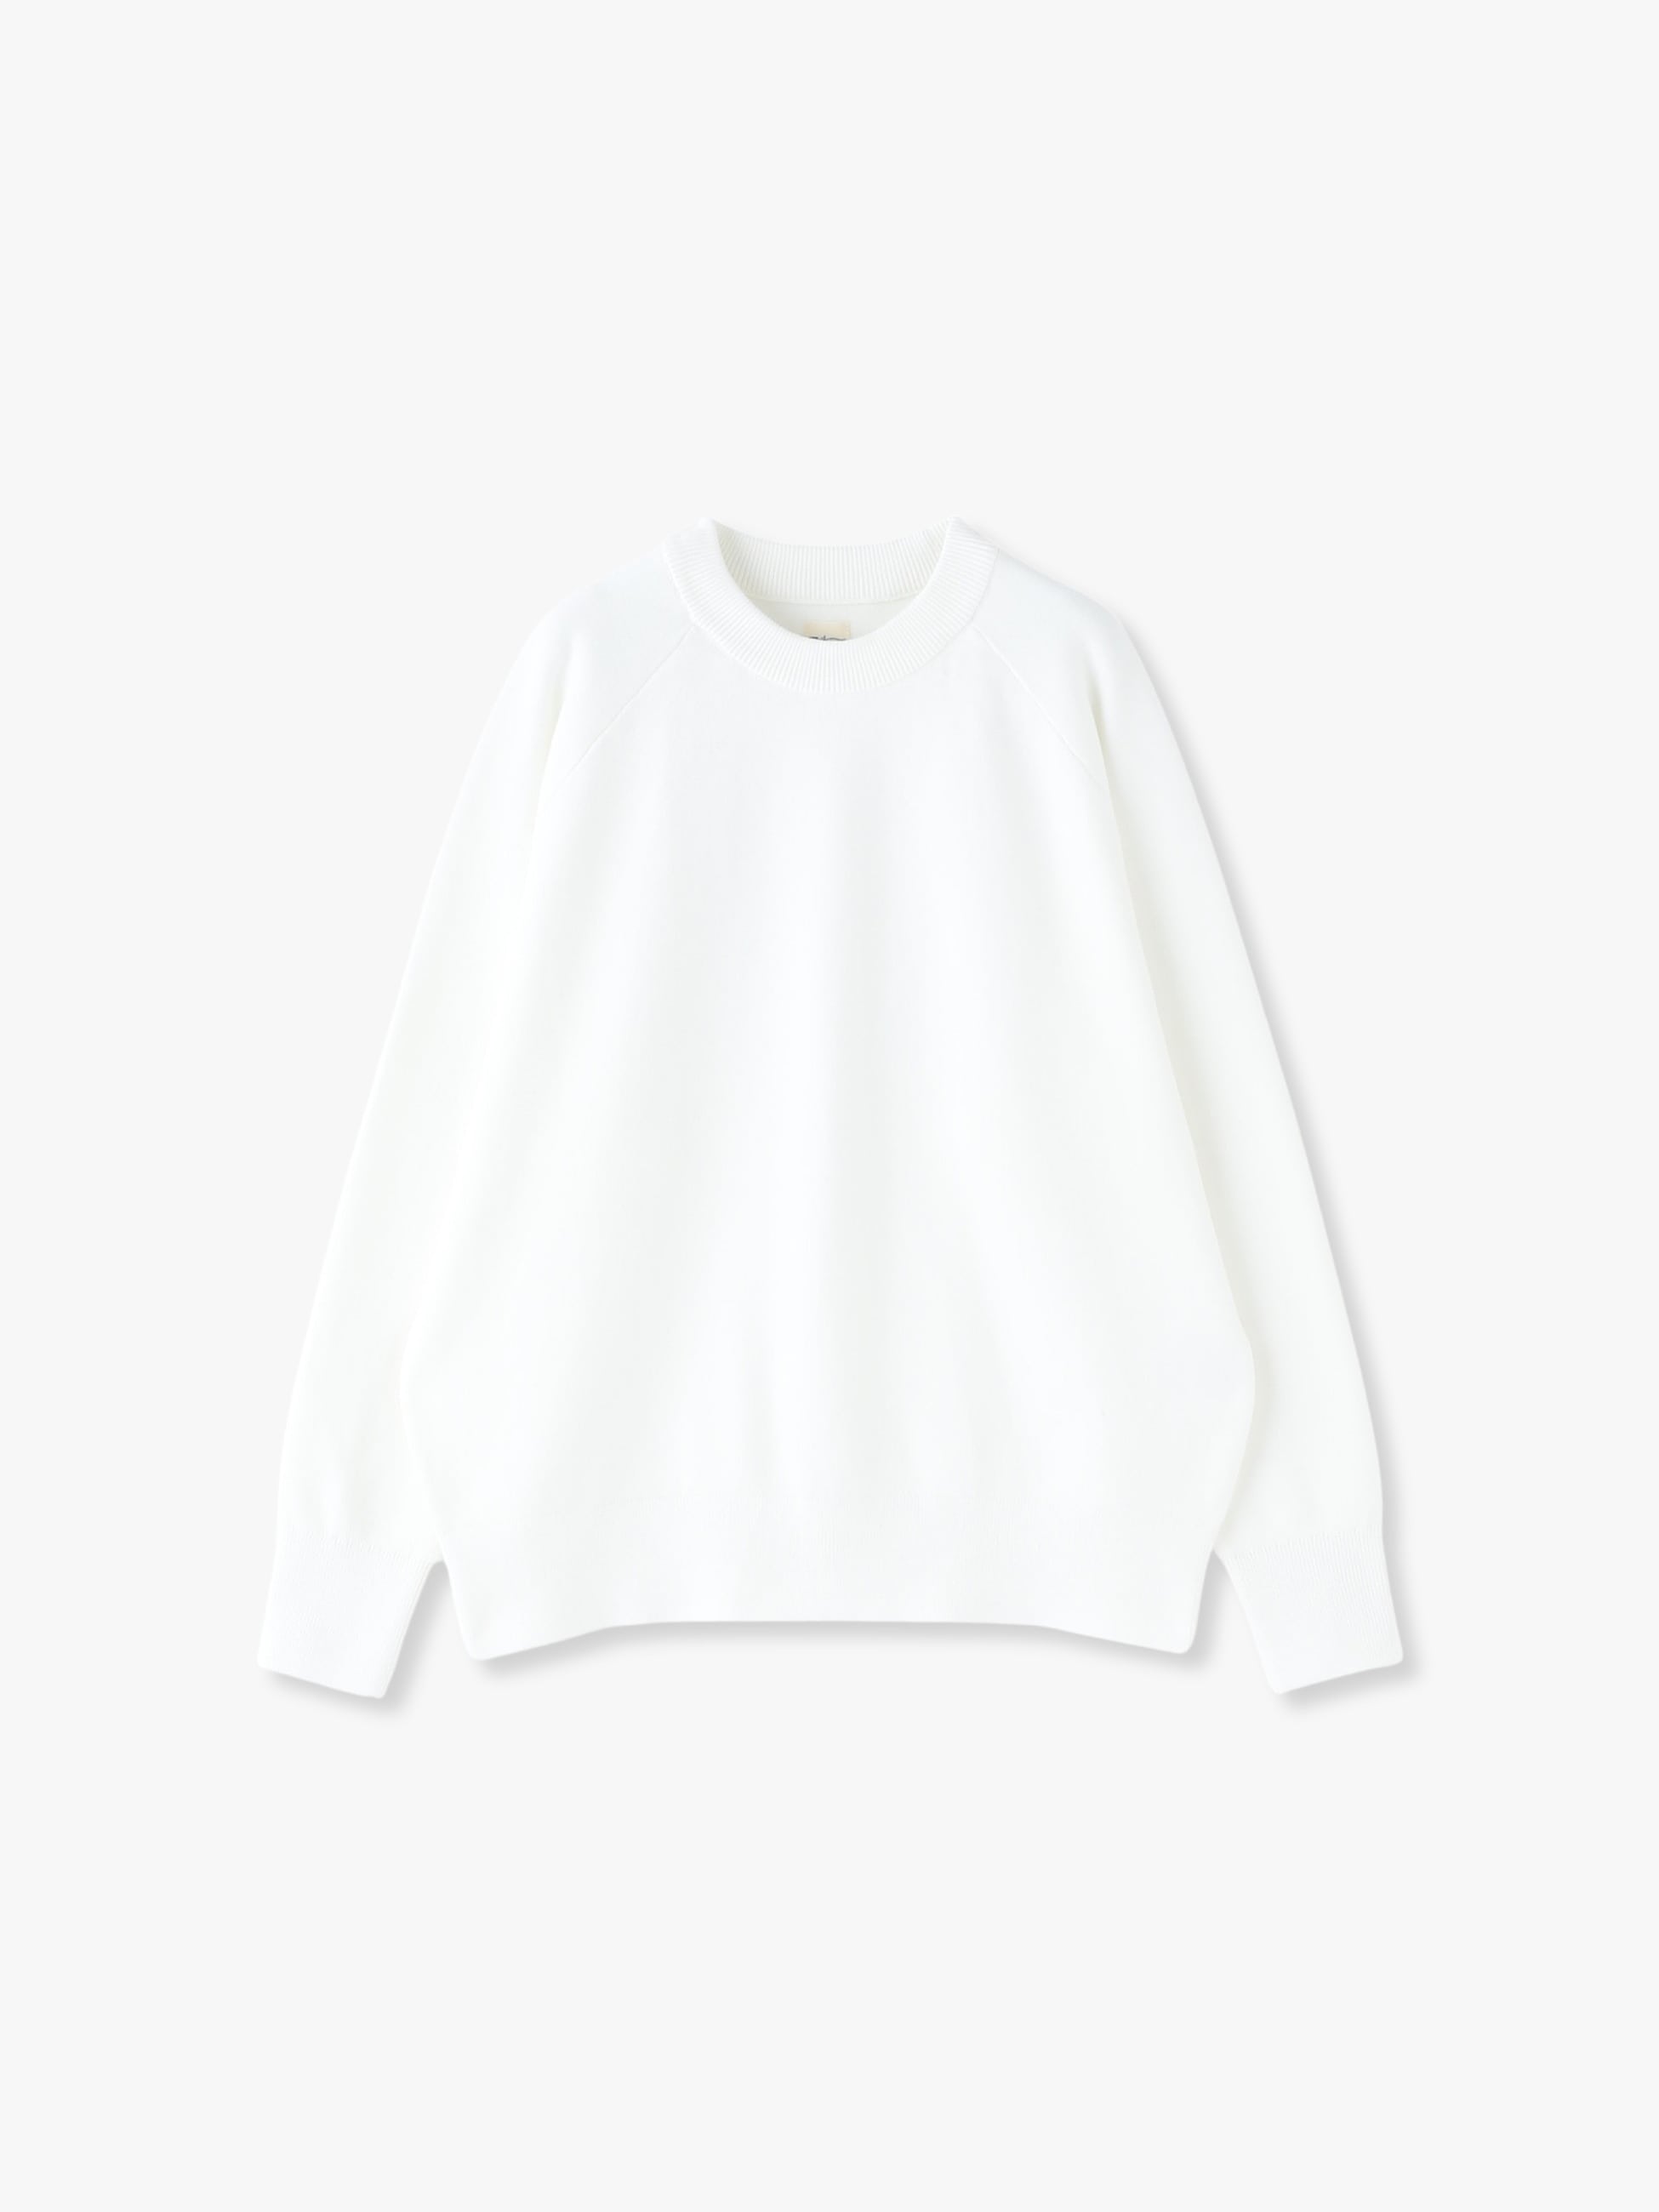 Suvin Cotton Smooth Knit Pullover 詳細画像 white 3